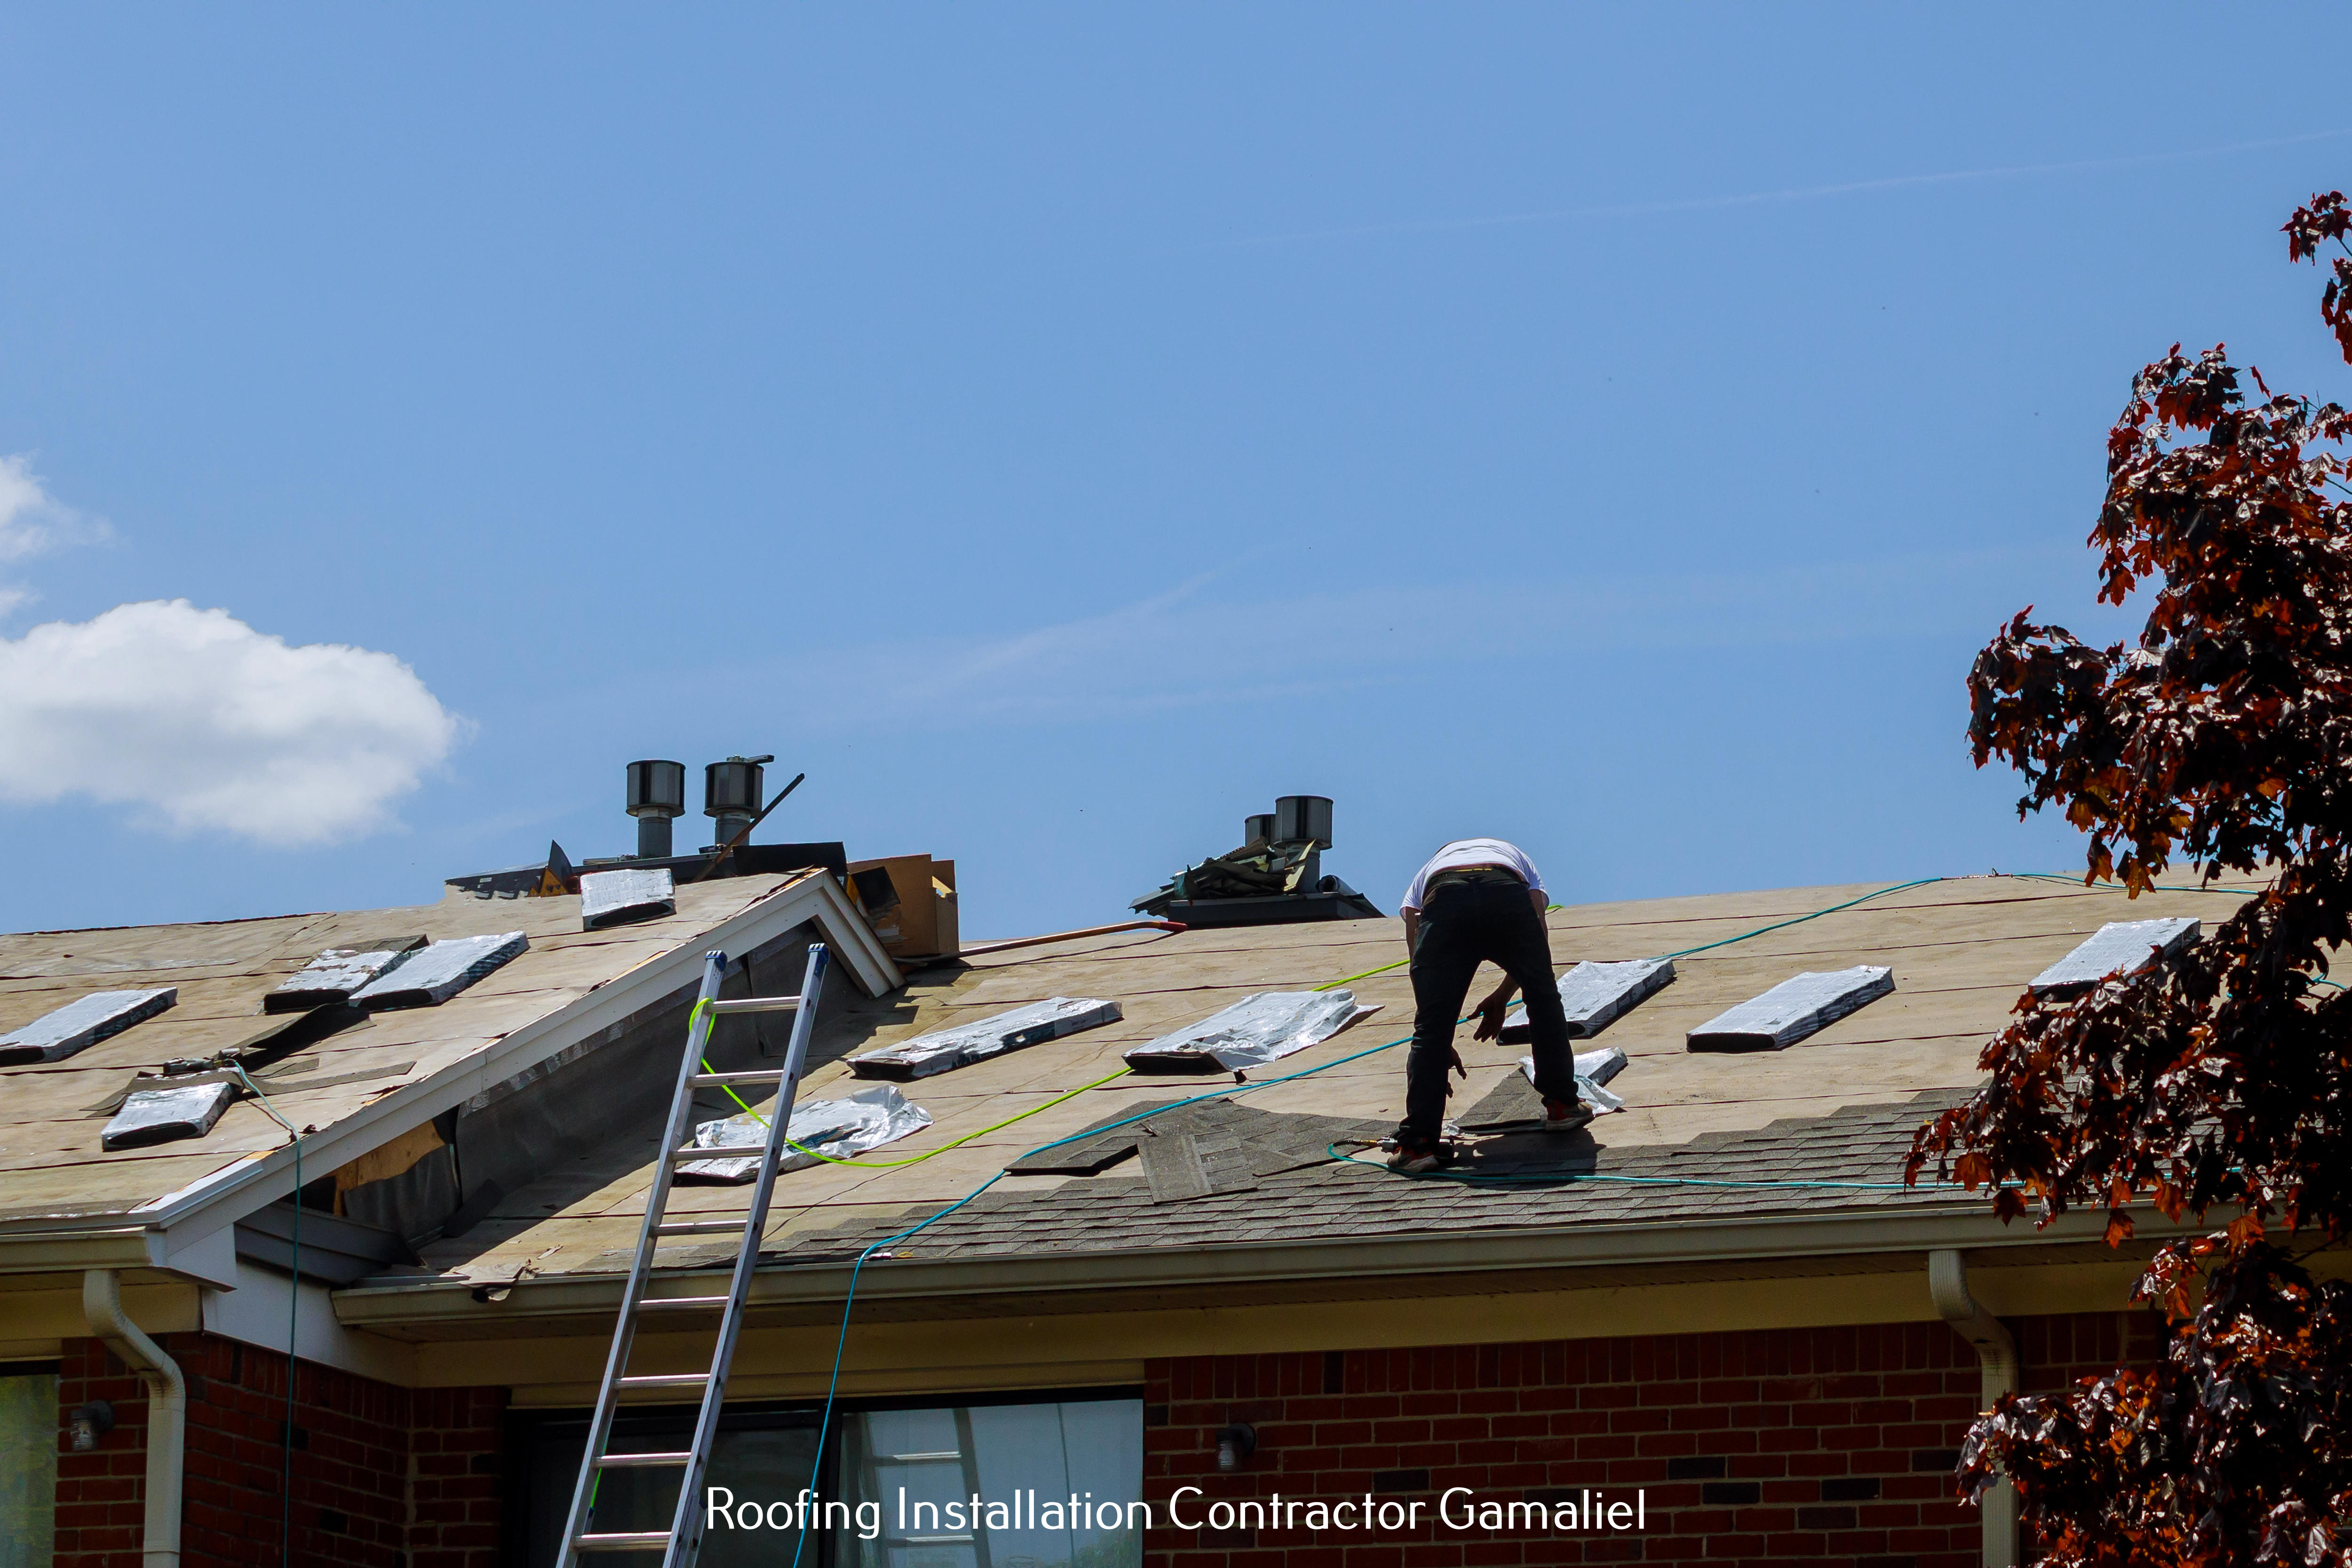 Lawrence Construction, Inc. Outlines the Common Indicators of a Roof That Needs Repair/Replacement